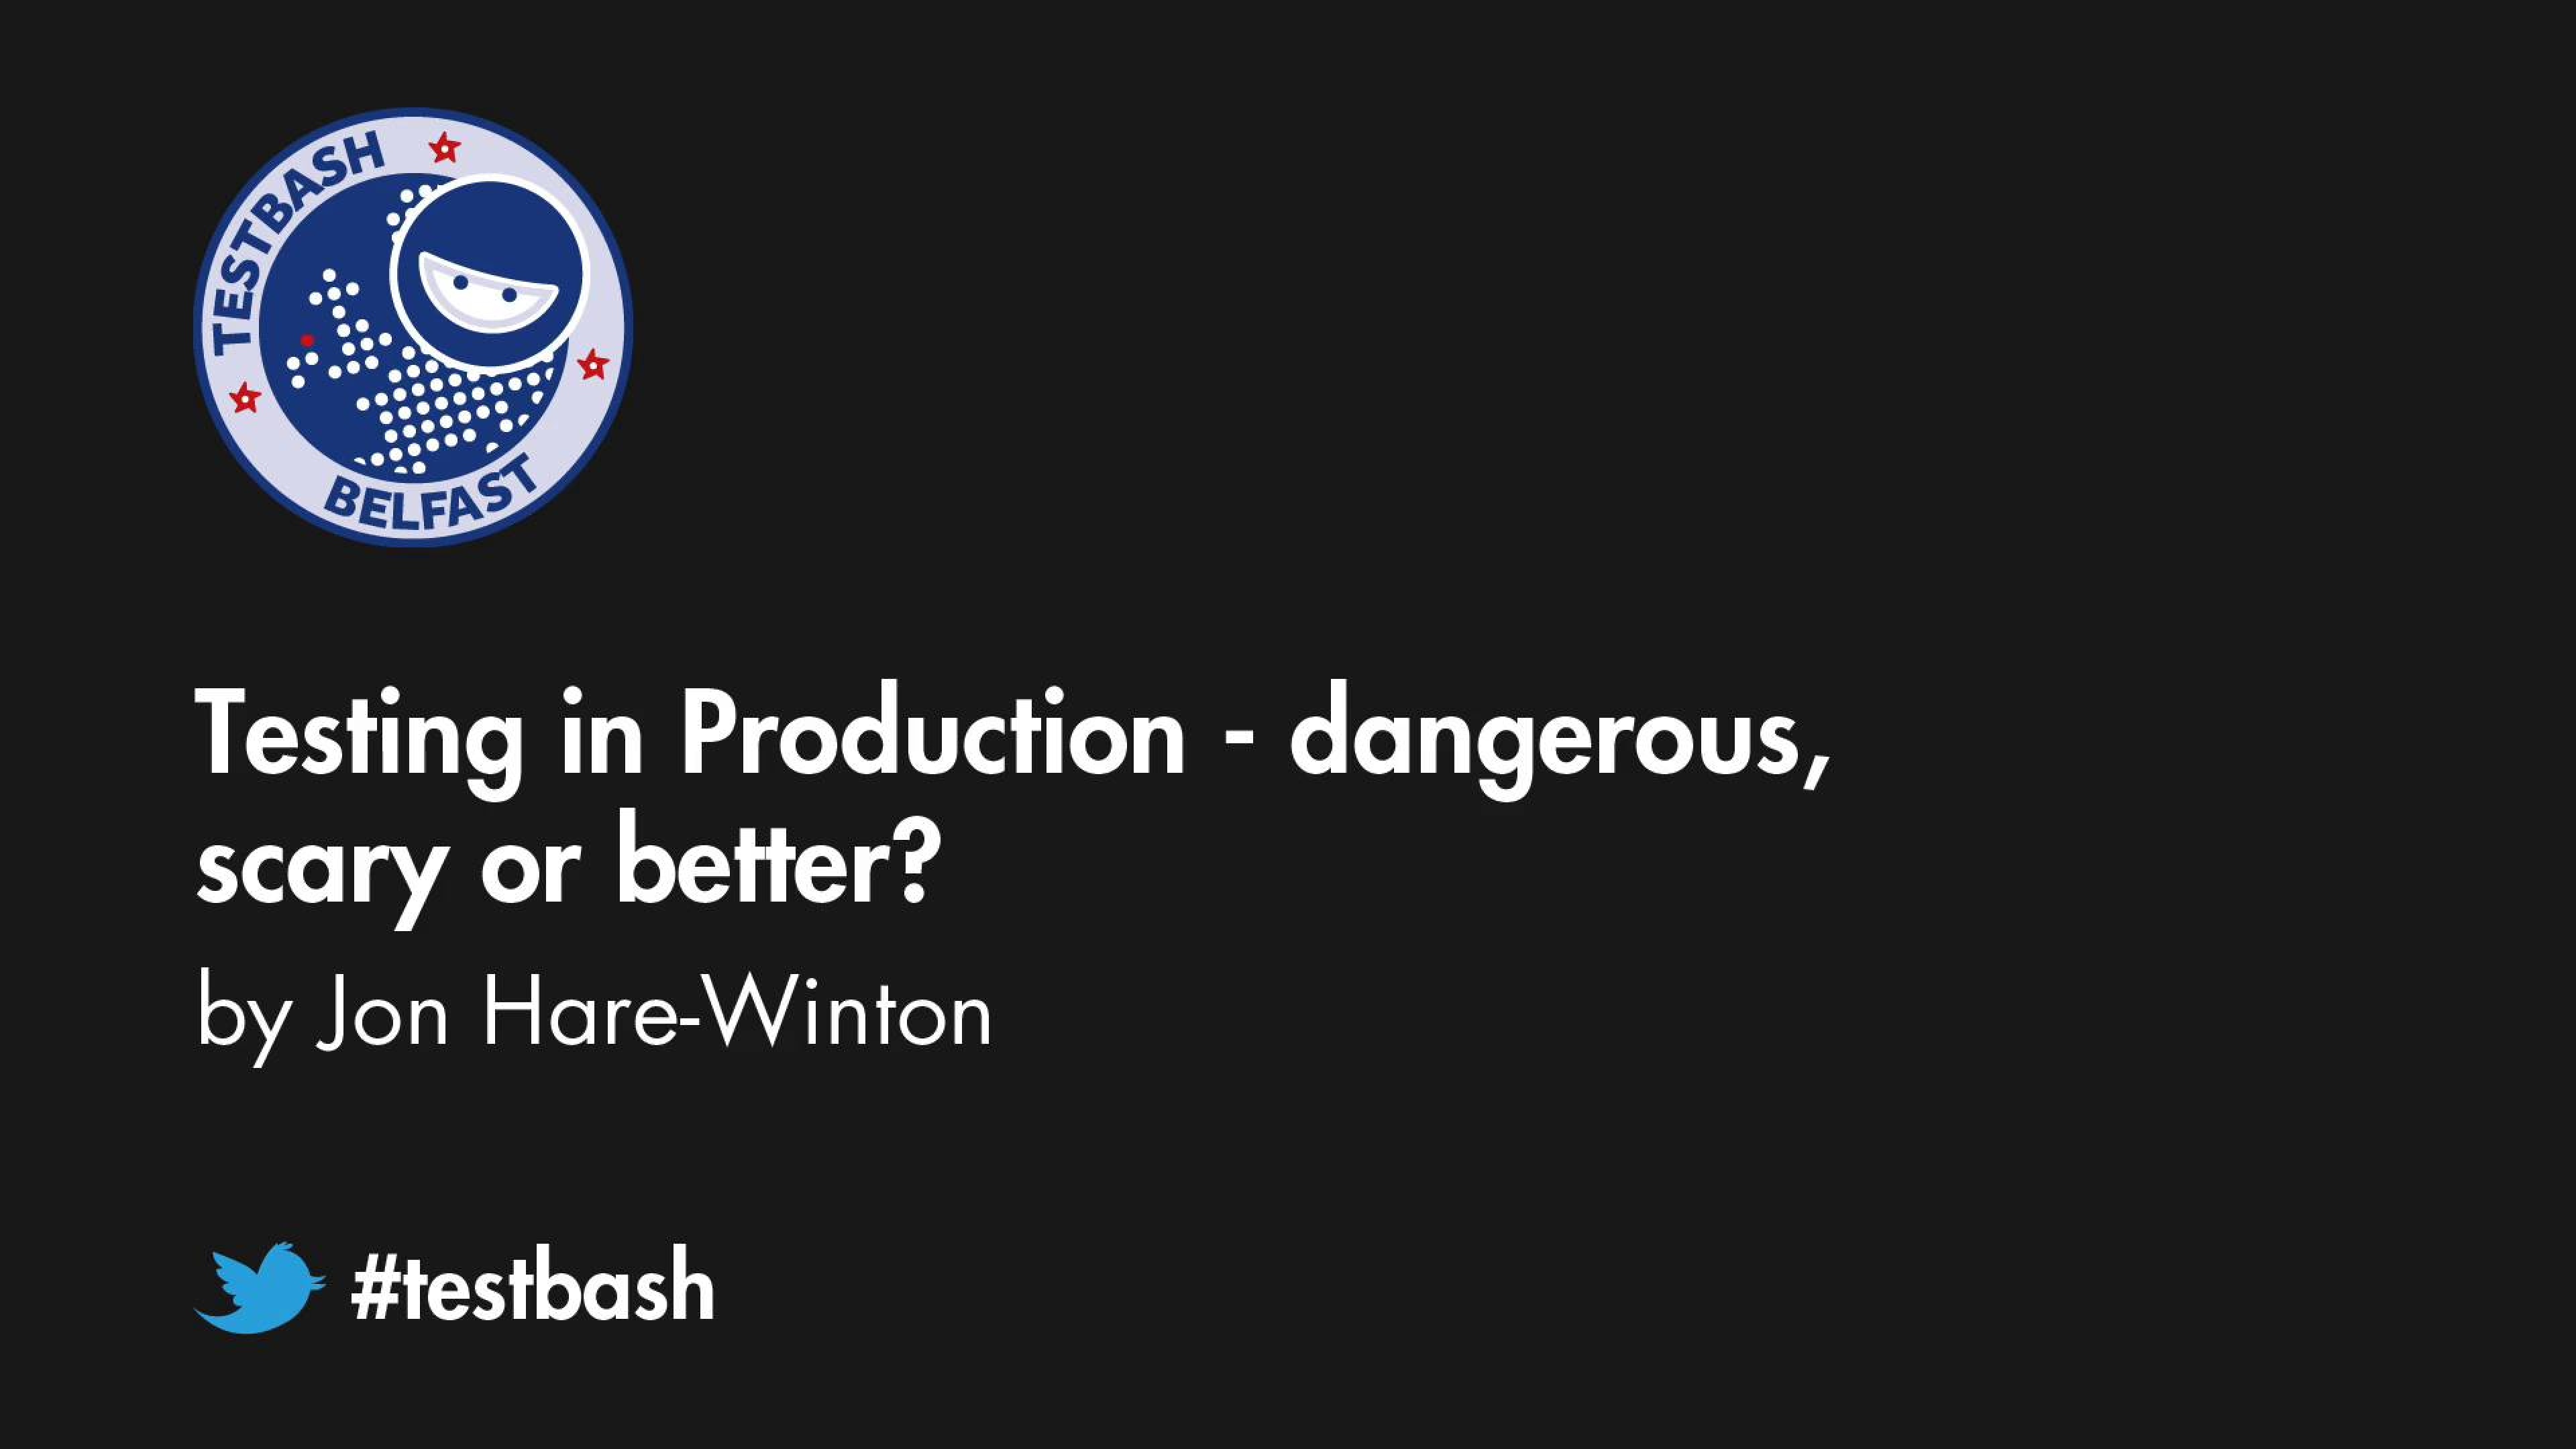 Testing in Production - dangerous, scary or better - Jon Hare-Winton